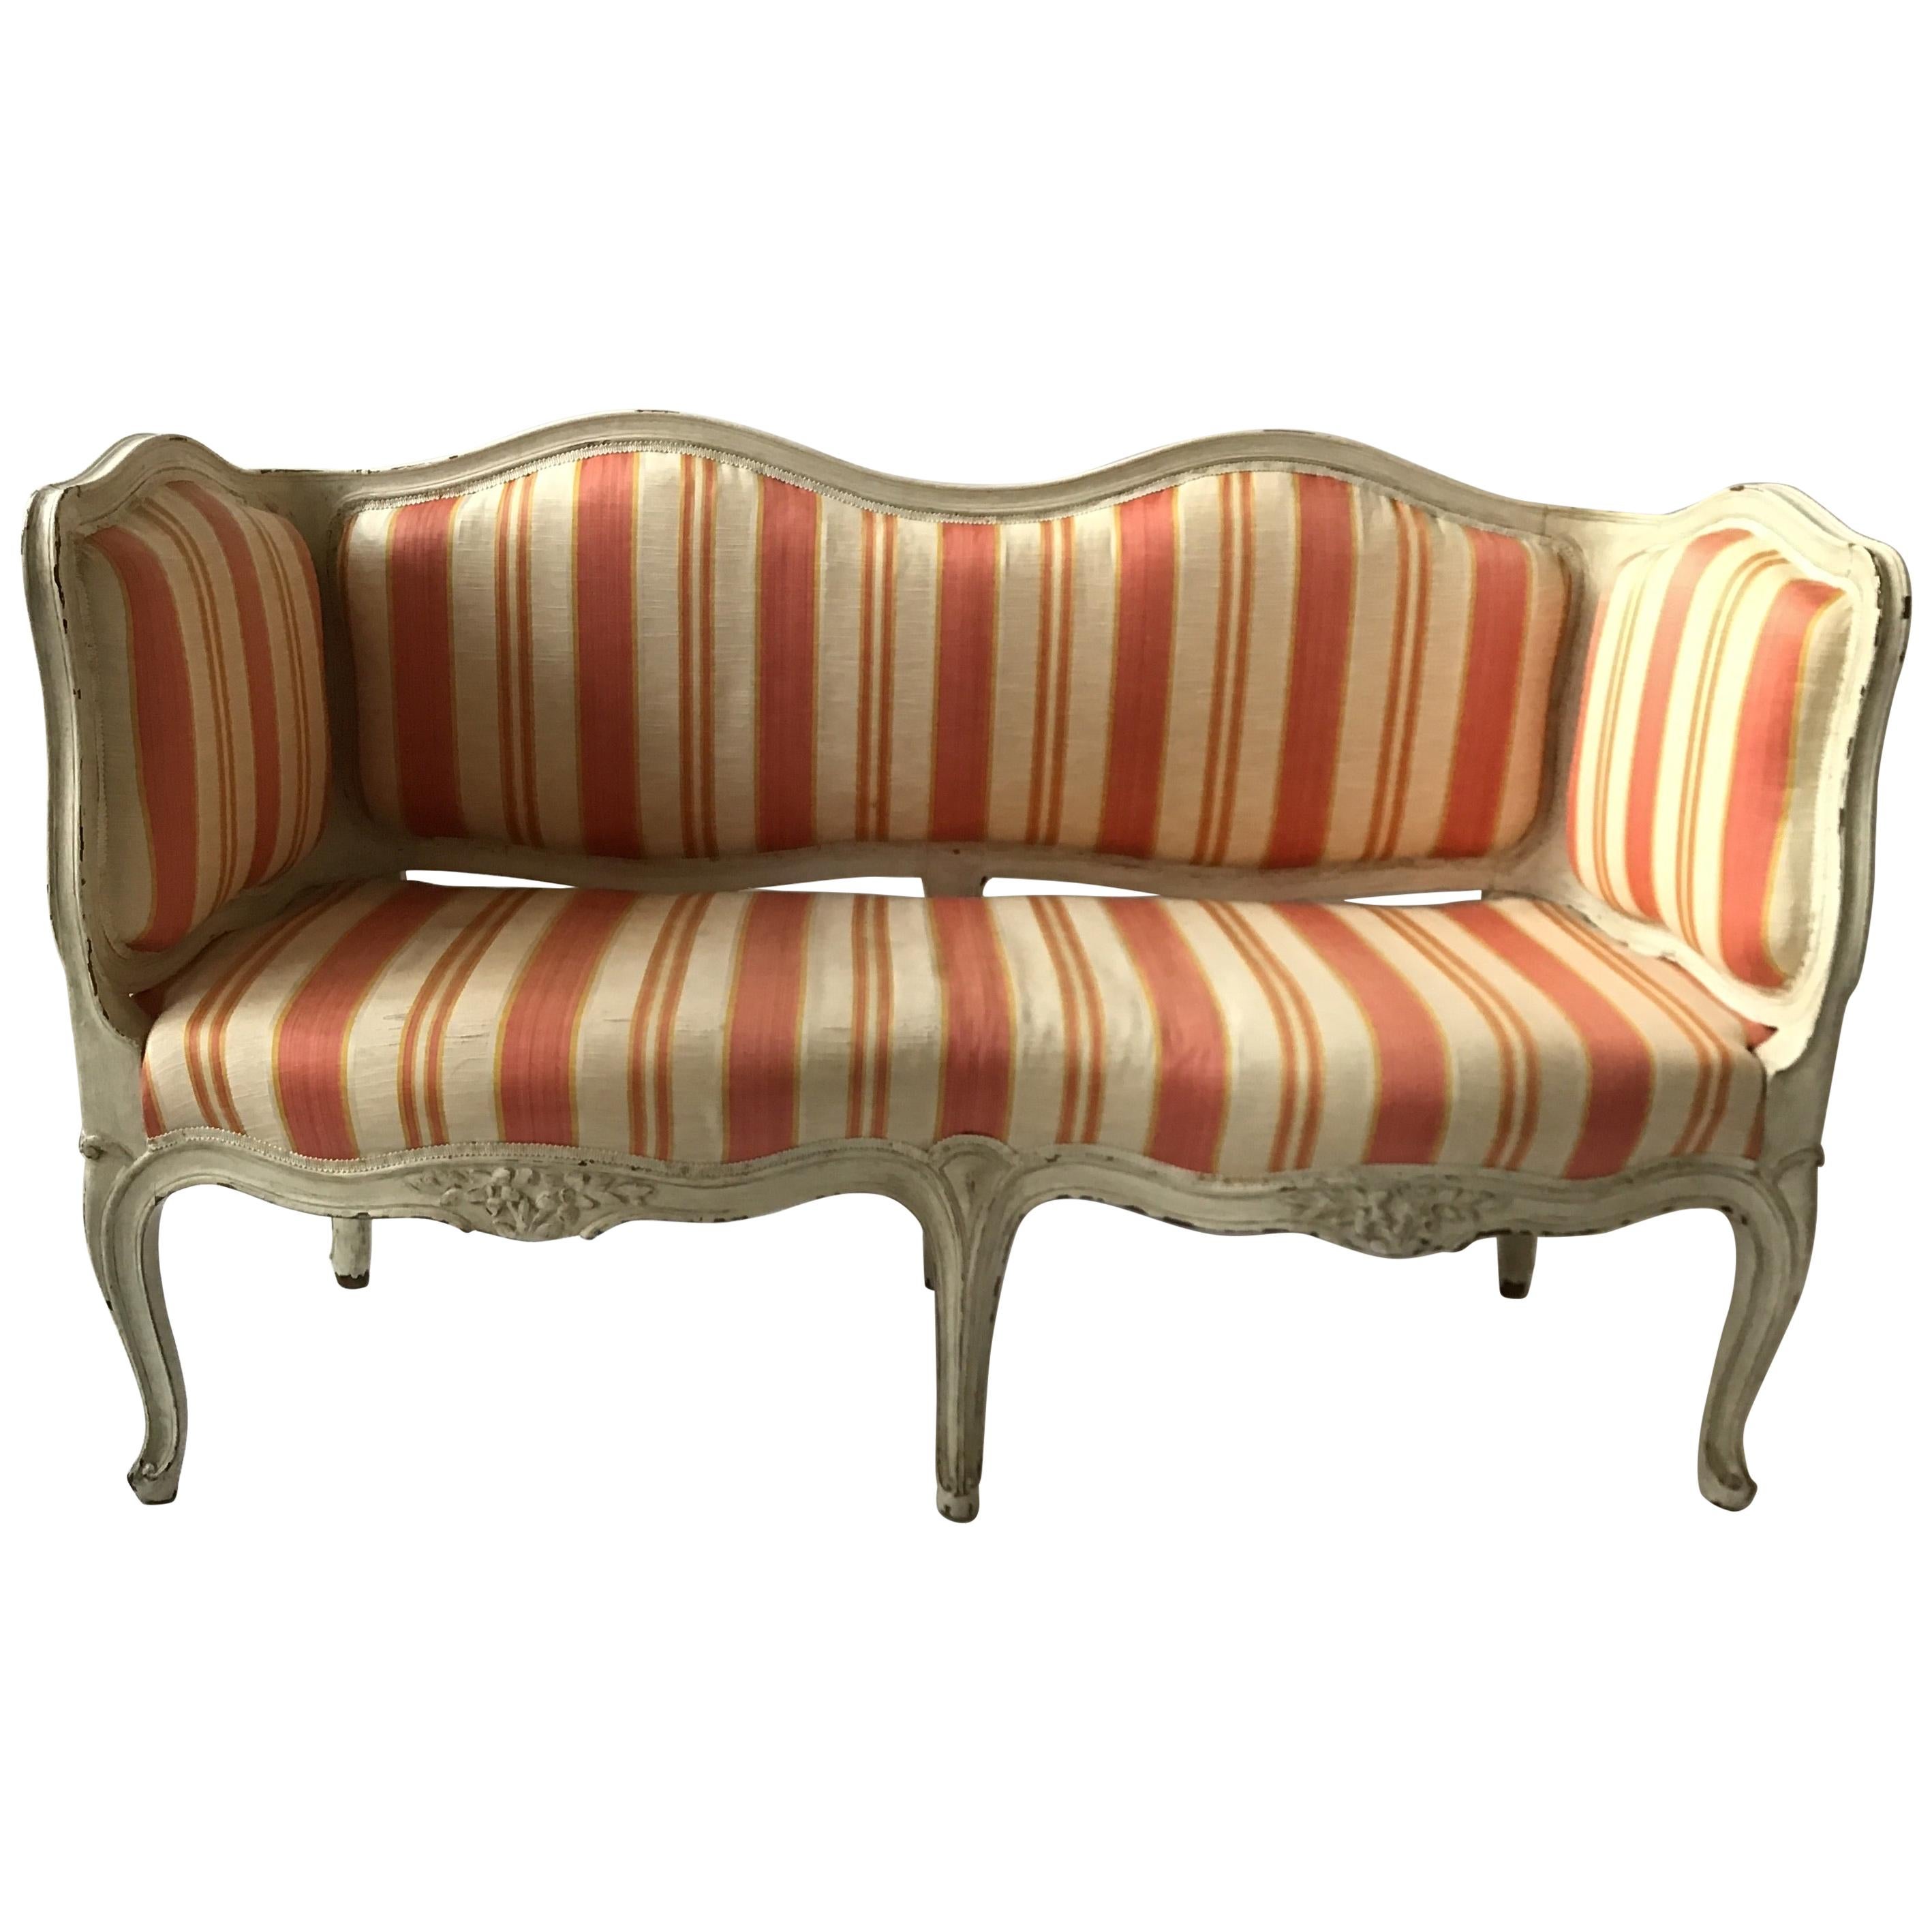 1960s French Style Louis XV High Sided Bench / Settee For Sale